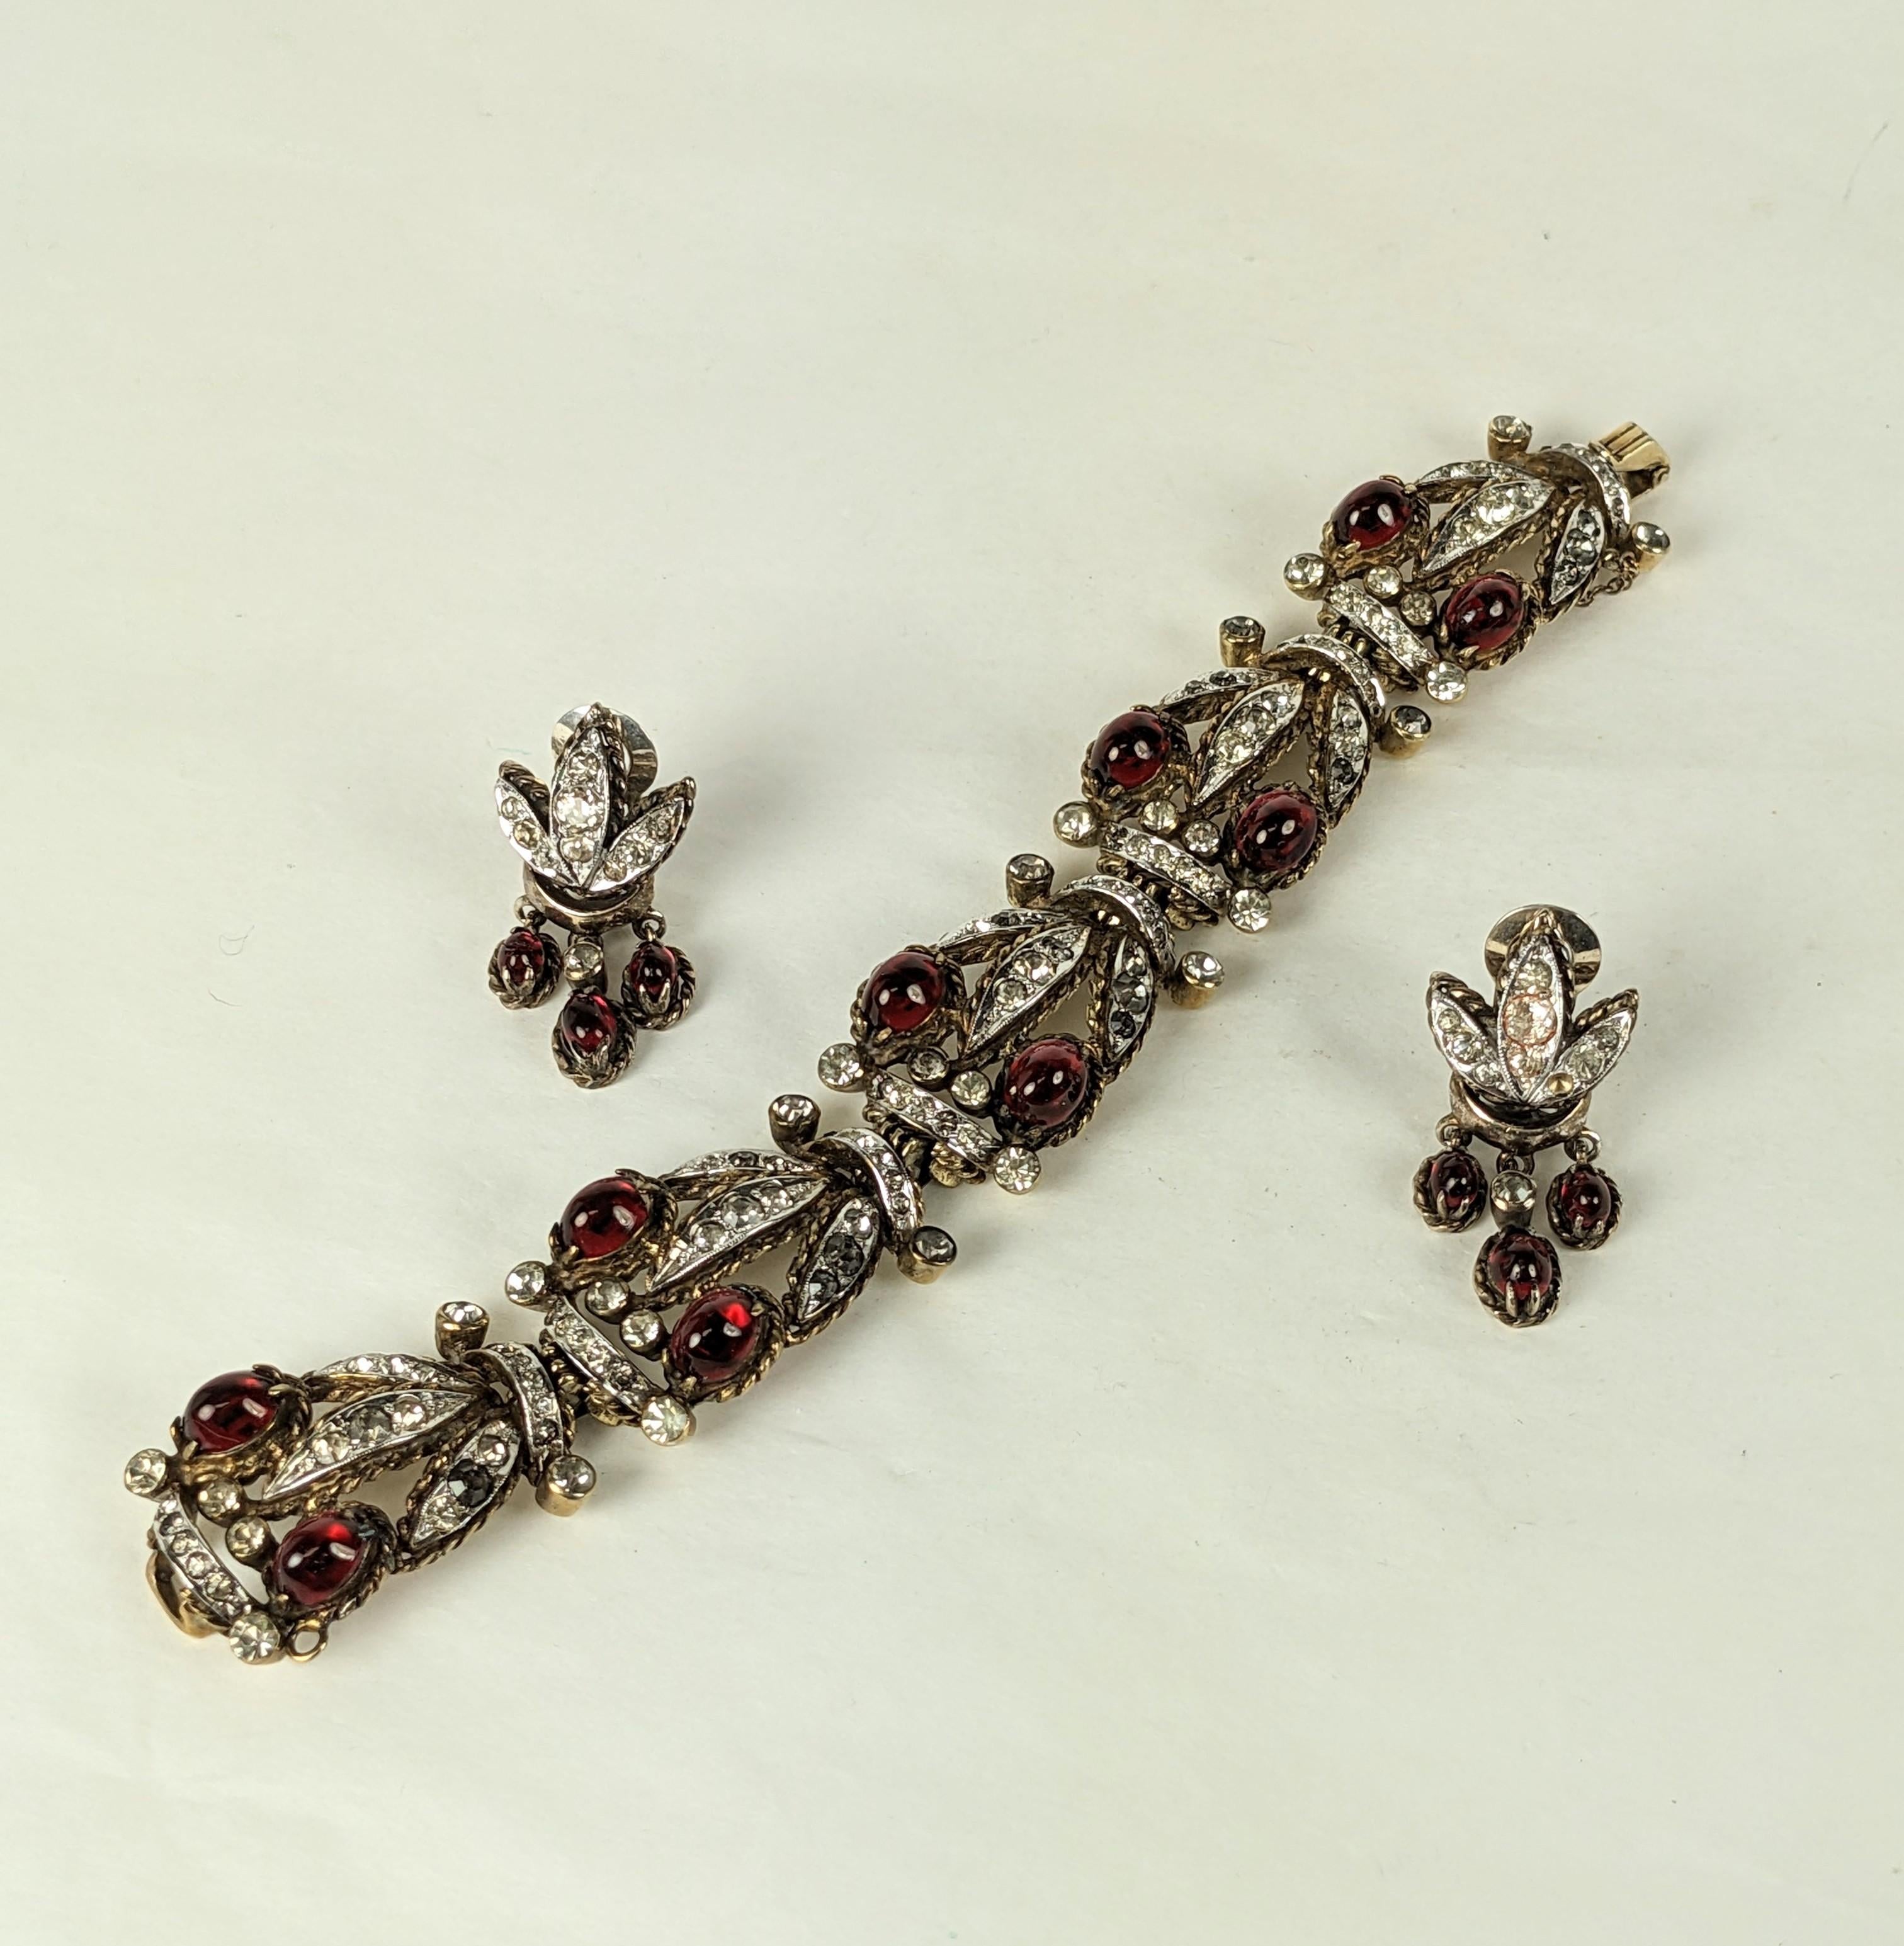 Ralph DeRosa Sterling Retro Vermeil Set from the 1940's. Retro style link bracelet in vermeil sterling with faux ruby cabs and crystal pastes. Clip earrings have dangling ruby pastes to match.
Pastes are set in sterling while the colored stones are